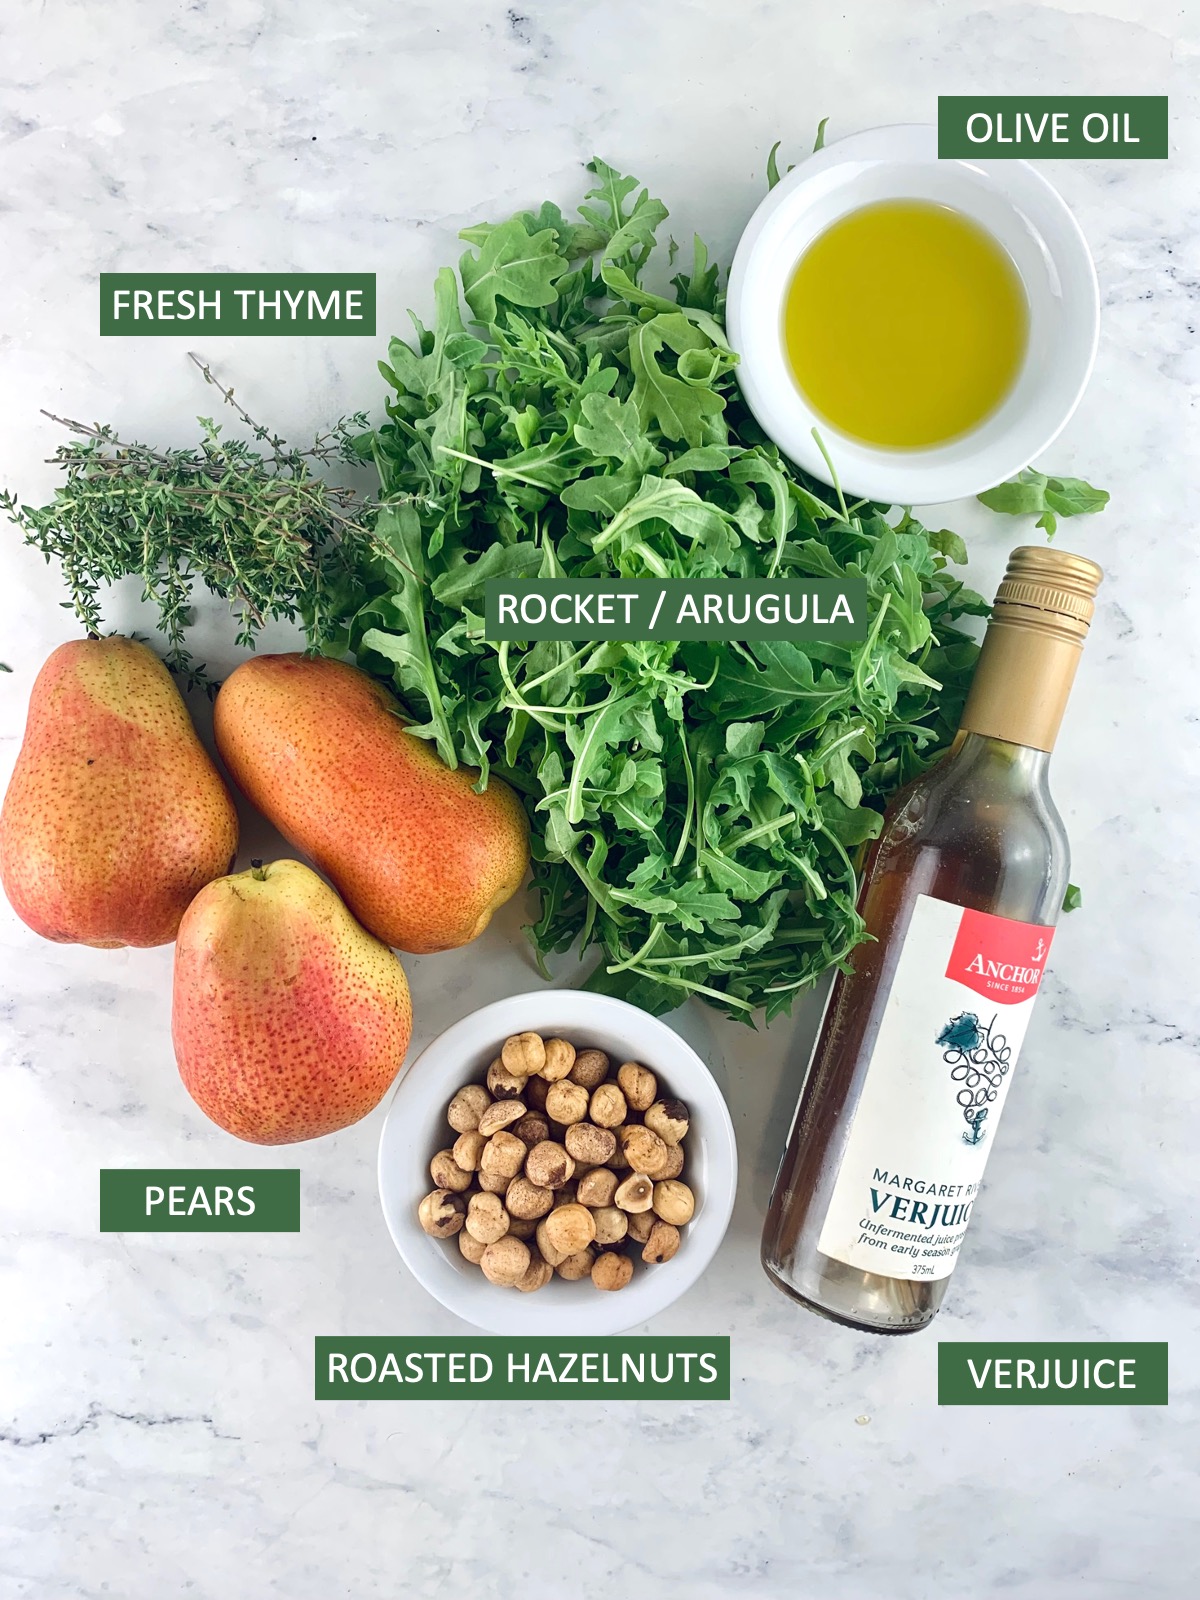 Labelled ingredients needed to make a pear and rocket salad.